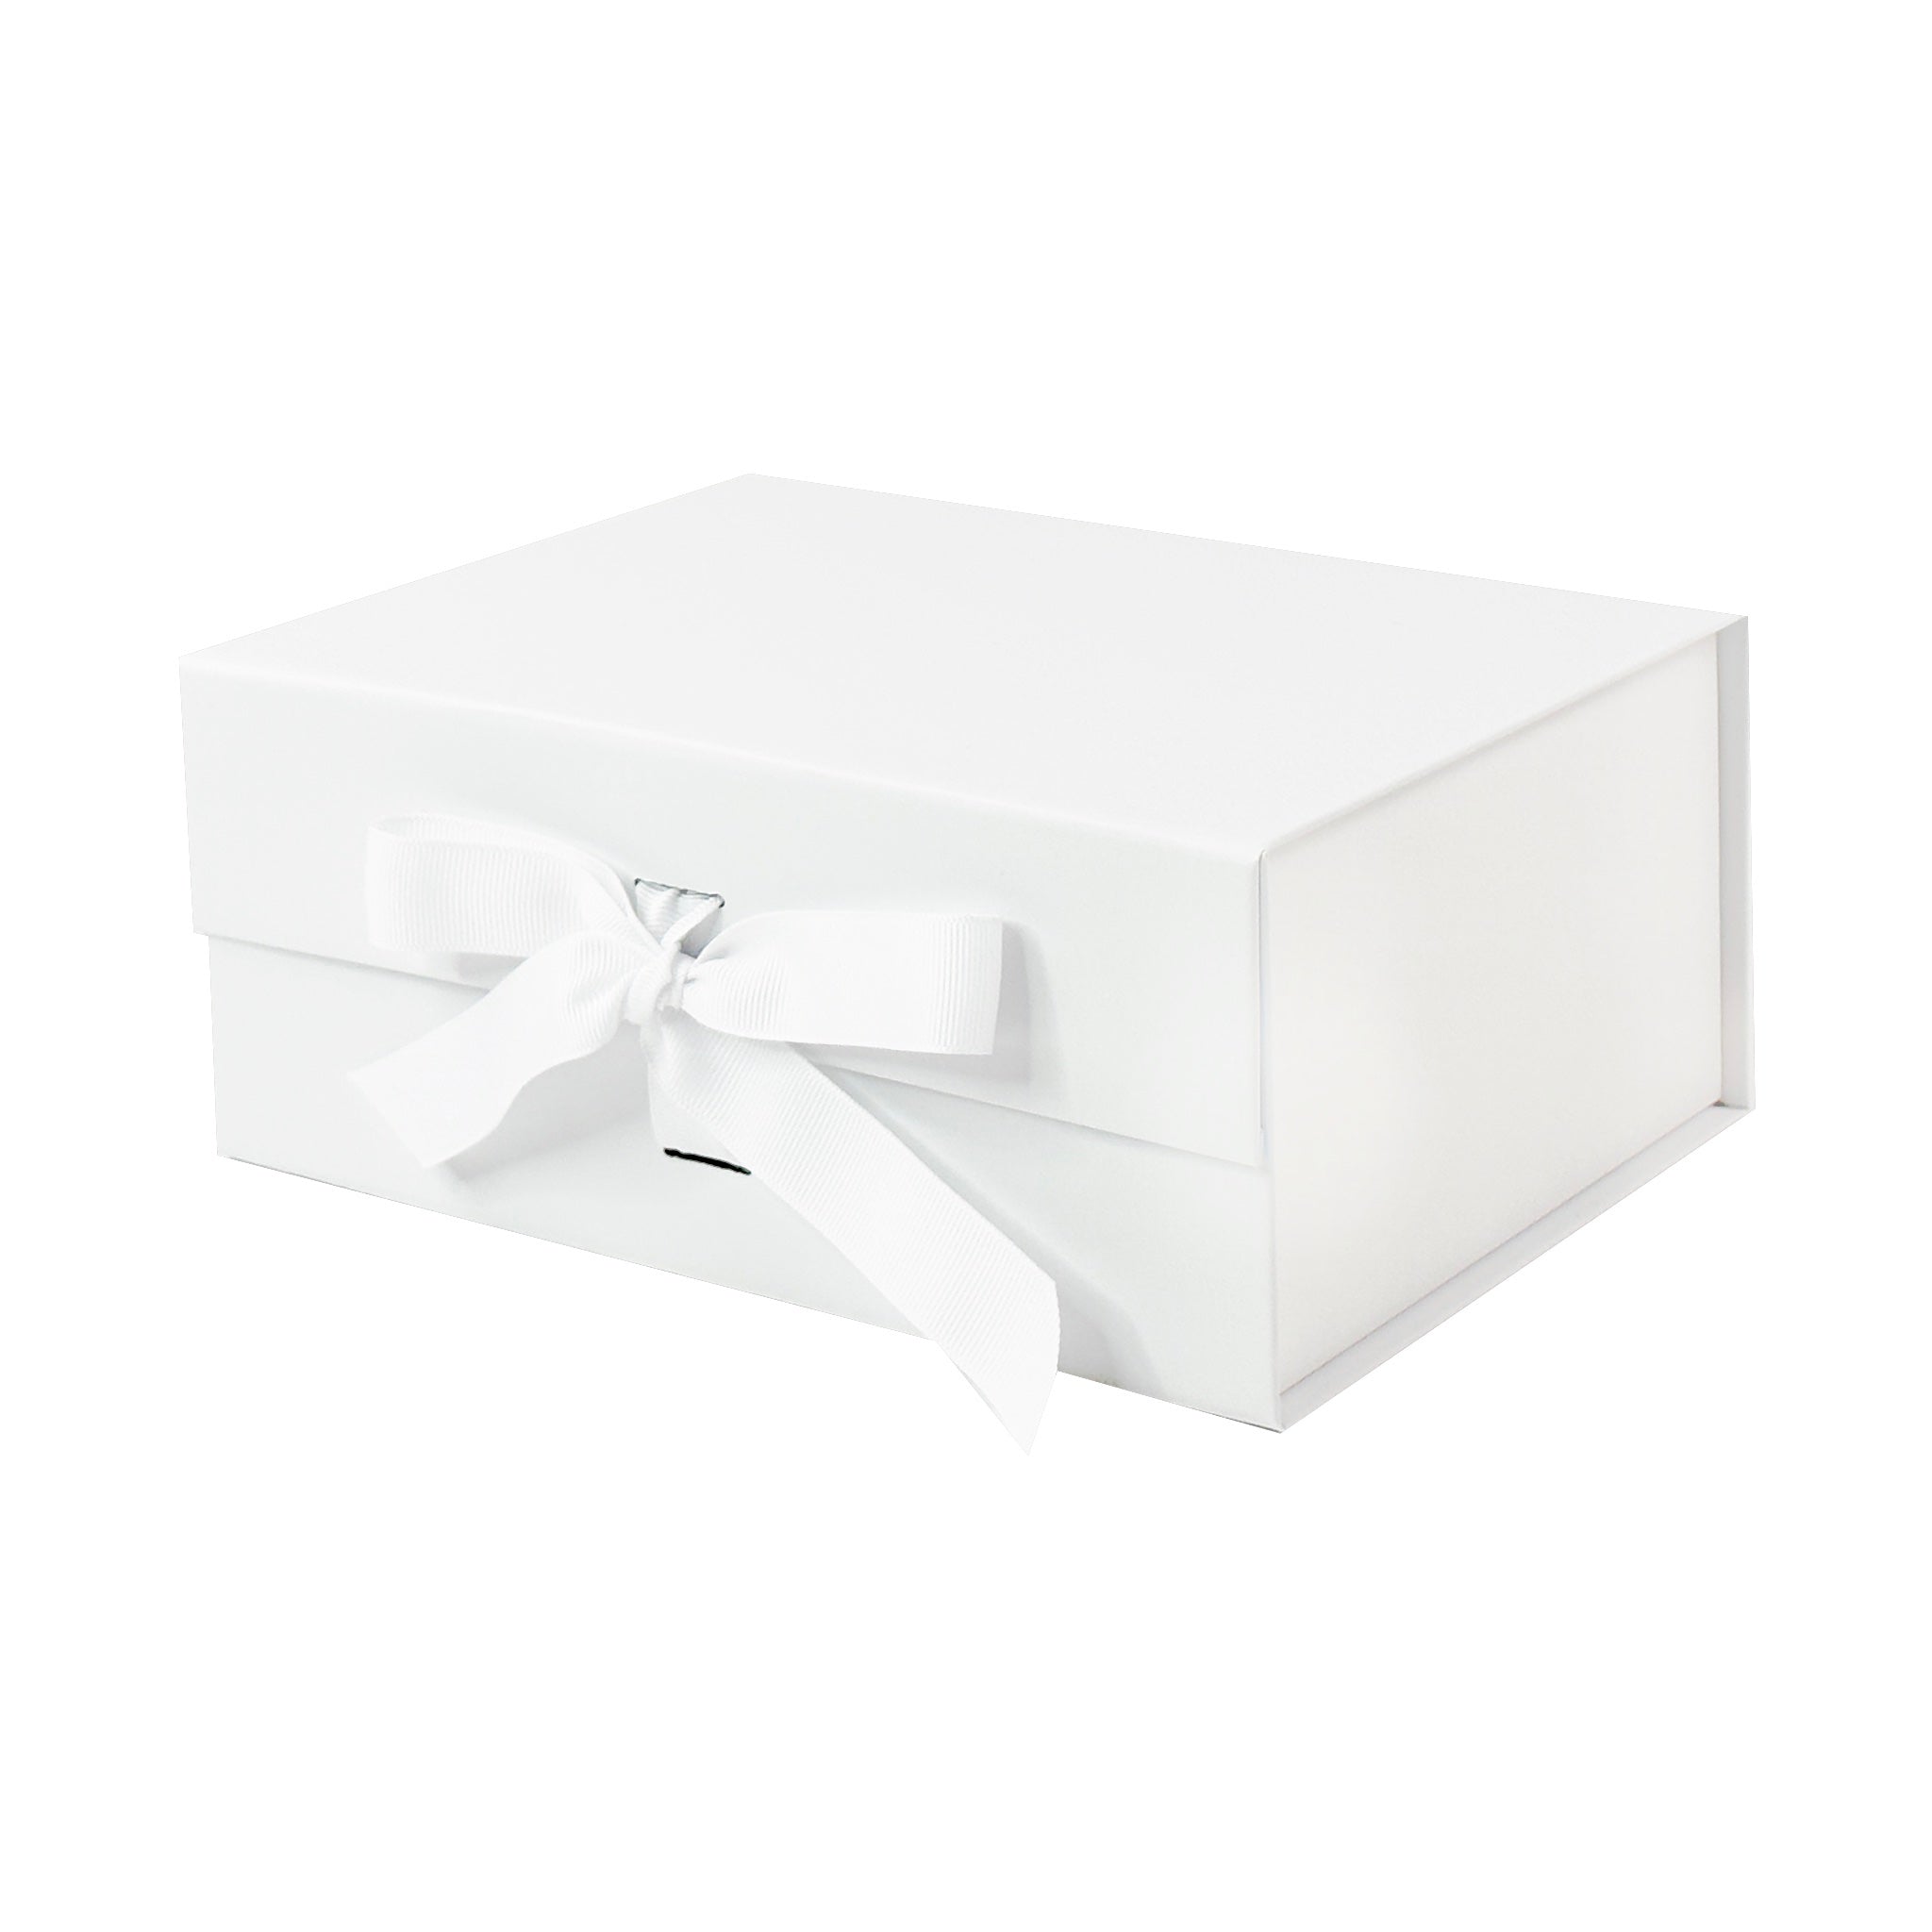 Large Square Kraft Magnetic Gift Box with Ribbon